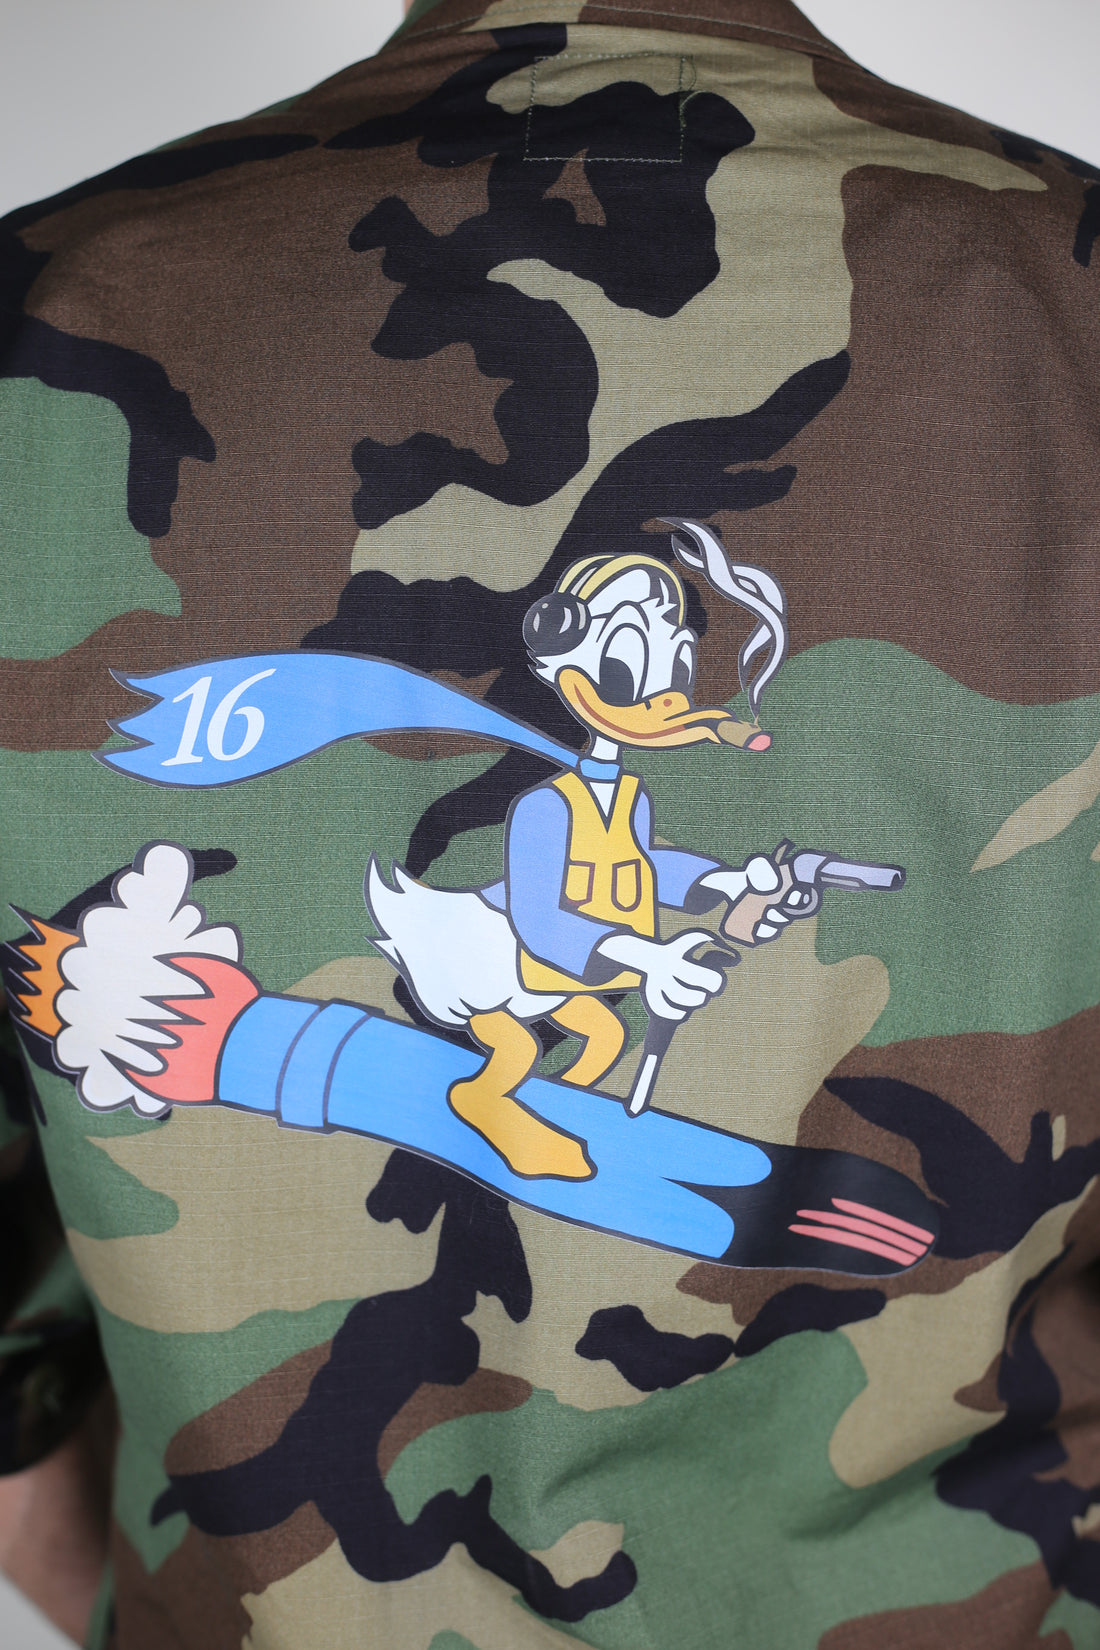 Giacca BDU WOODLAND  Us Army Donald Duck-  L -